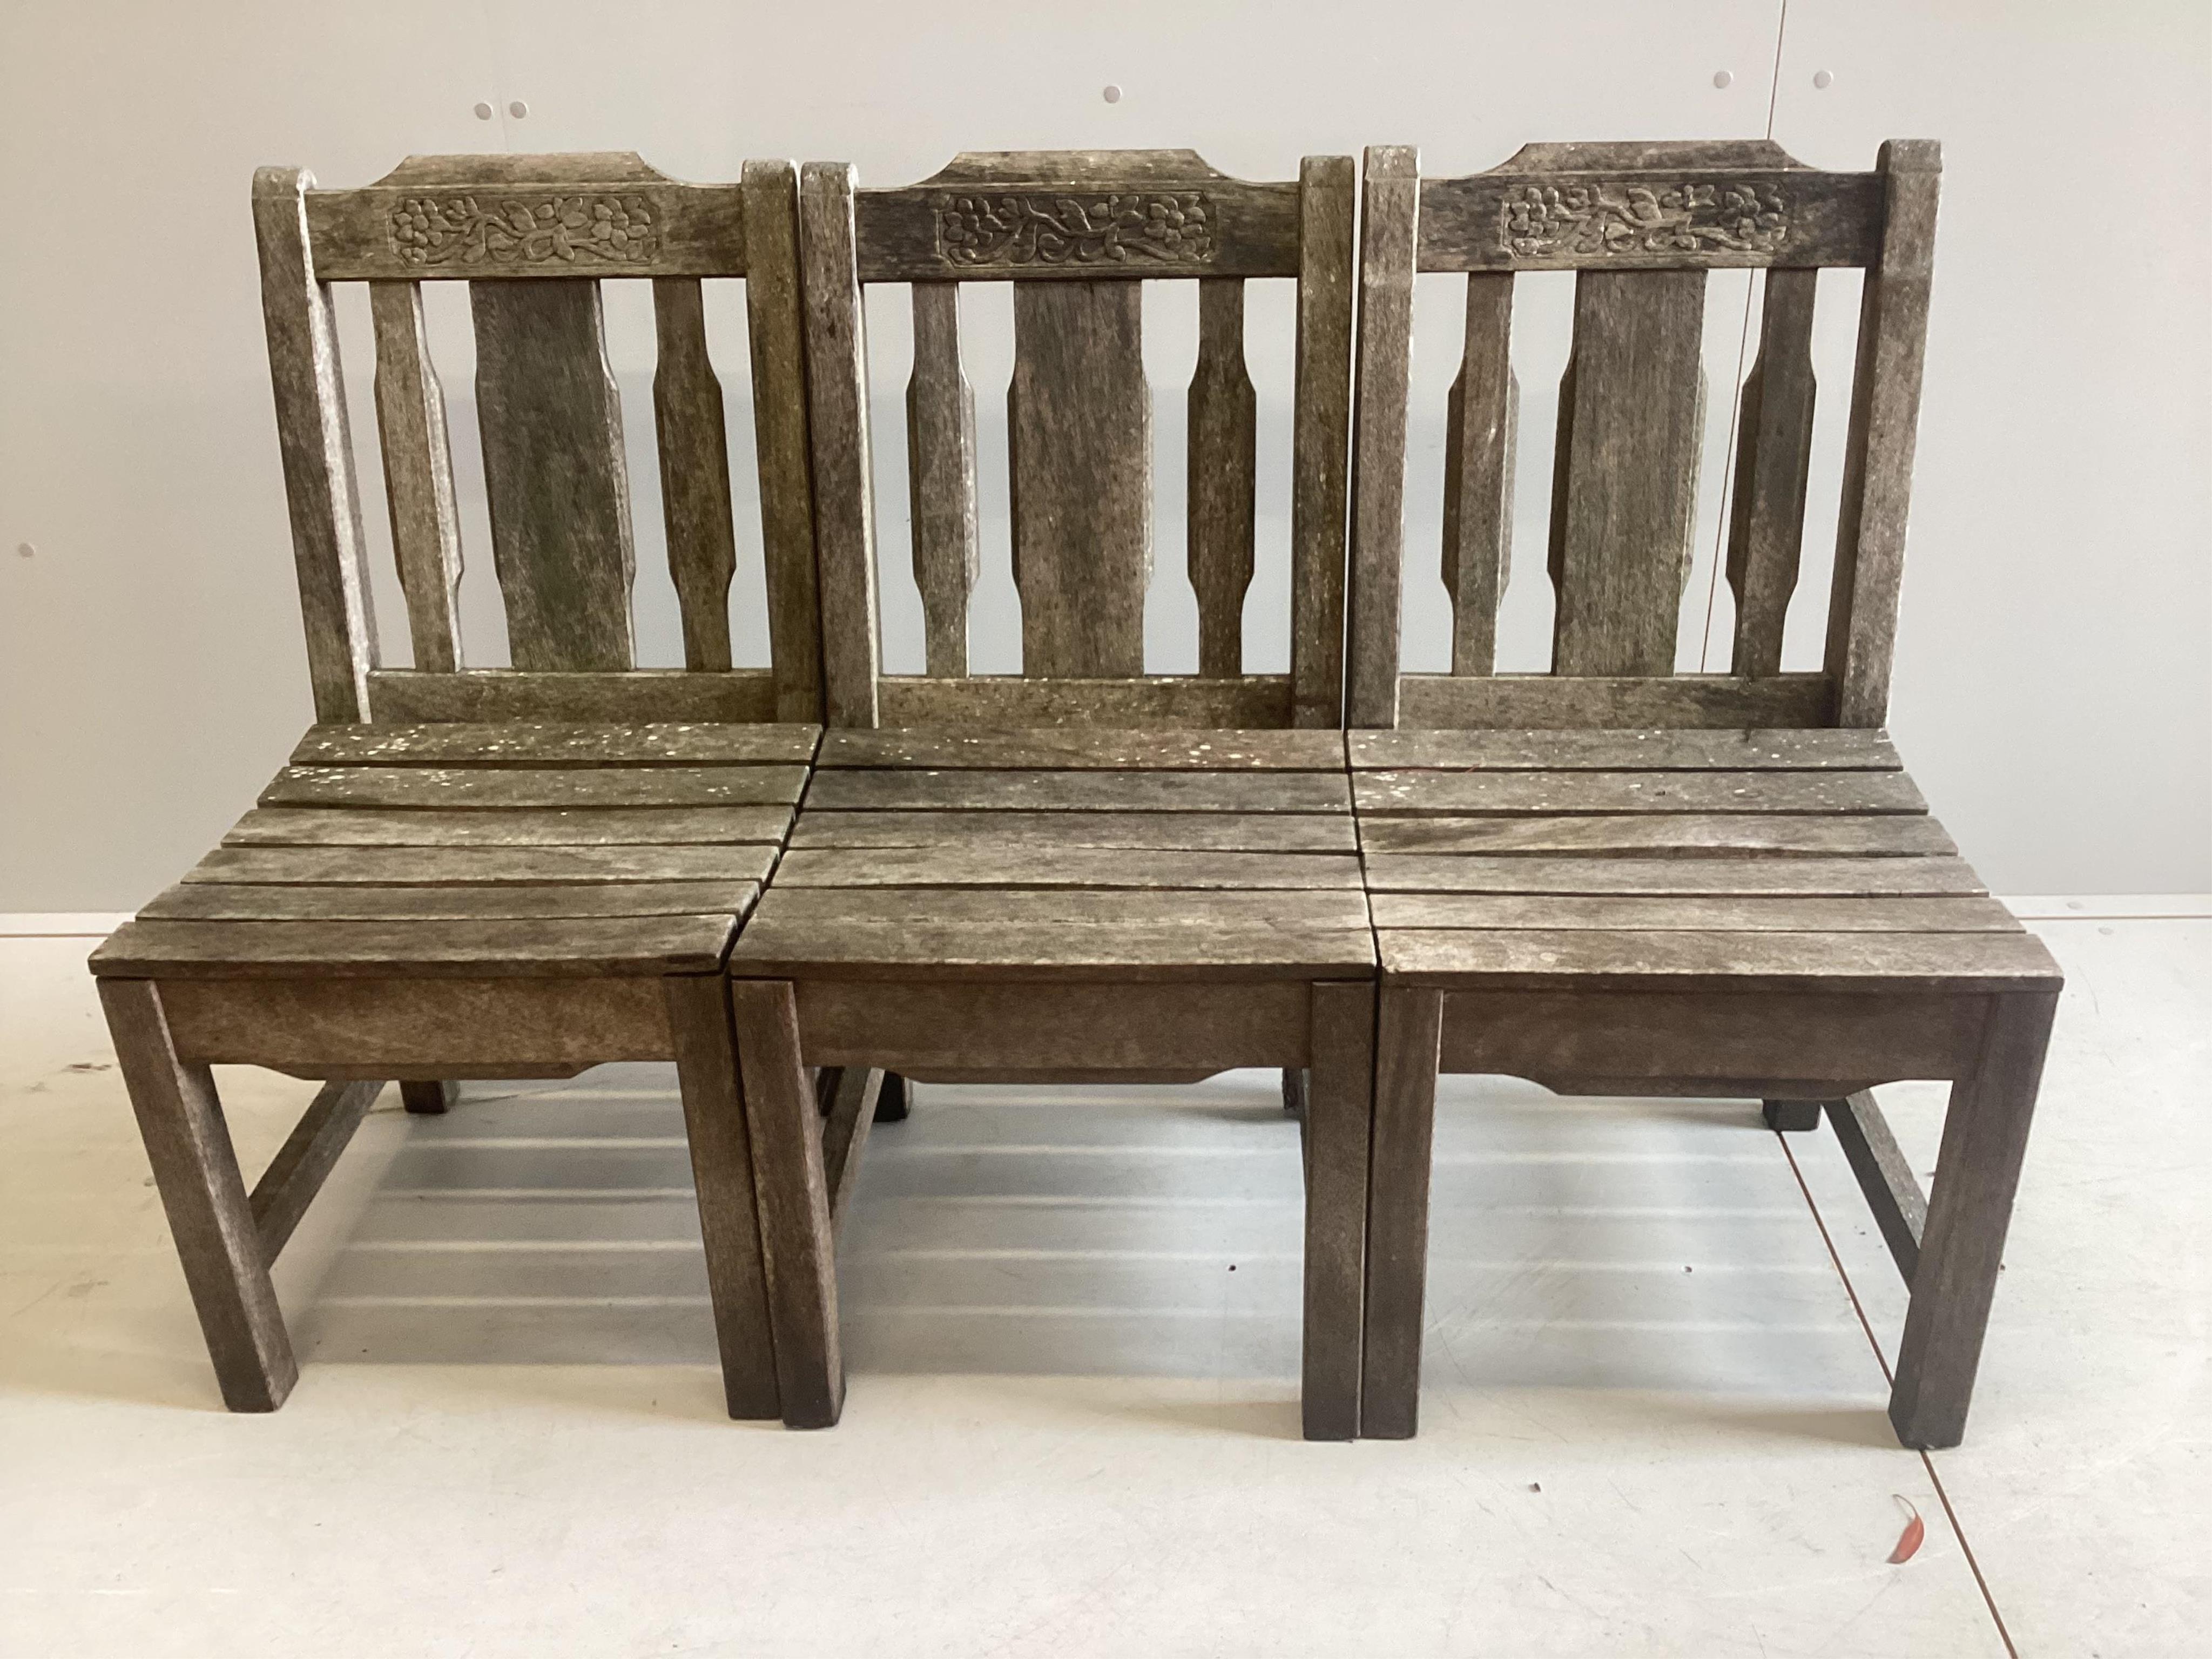 A vintage Bridgman & Co iroko hardwood rectangular garden table, width 182cm, depth 122cm, height 74cm and five chairs, two with arms. Condition - fair